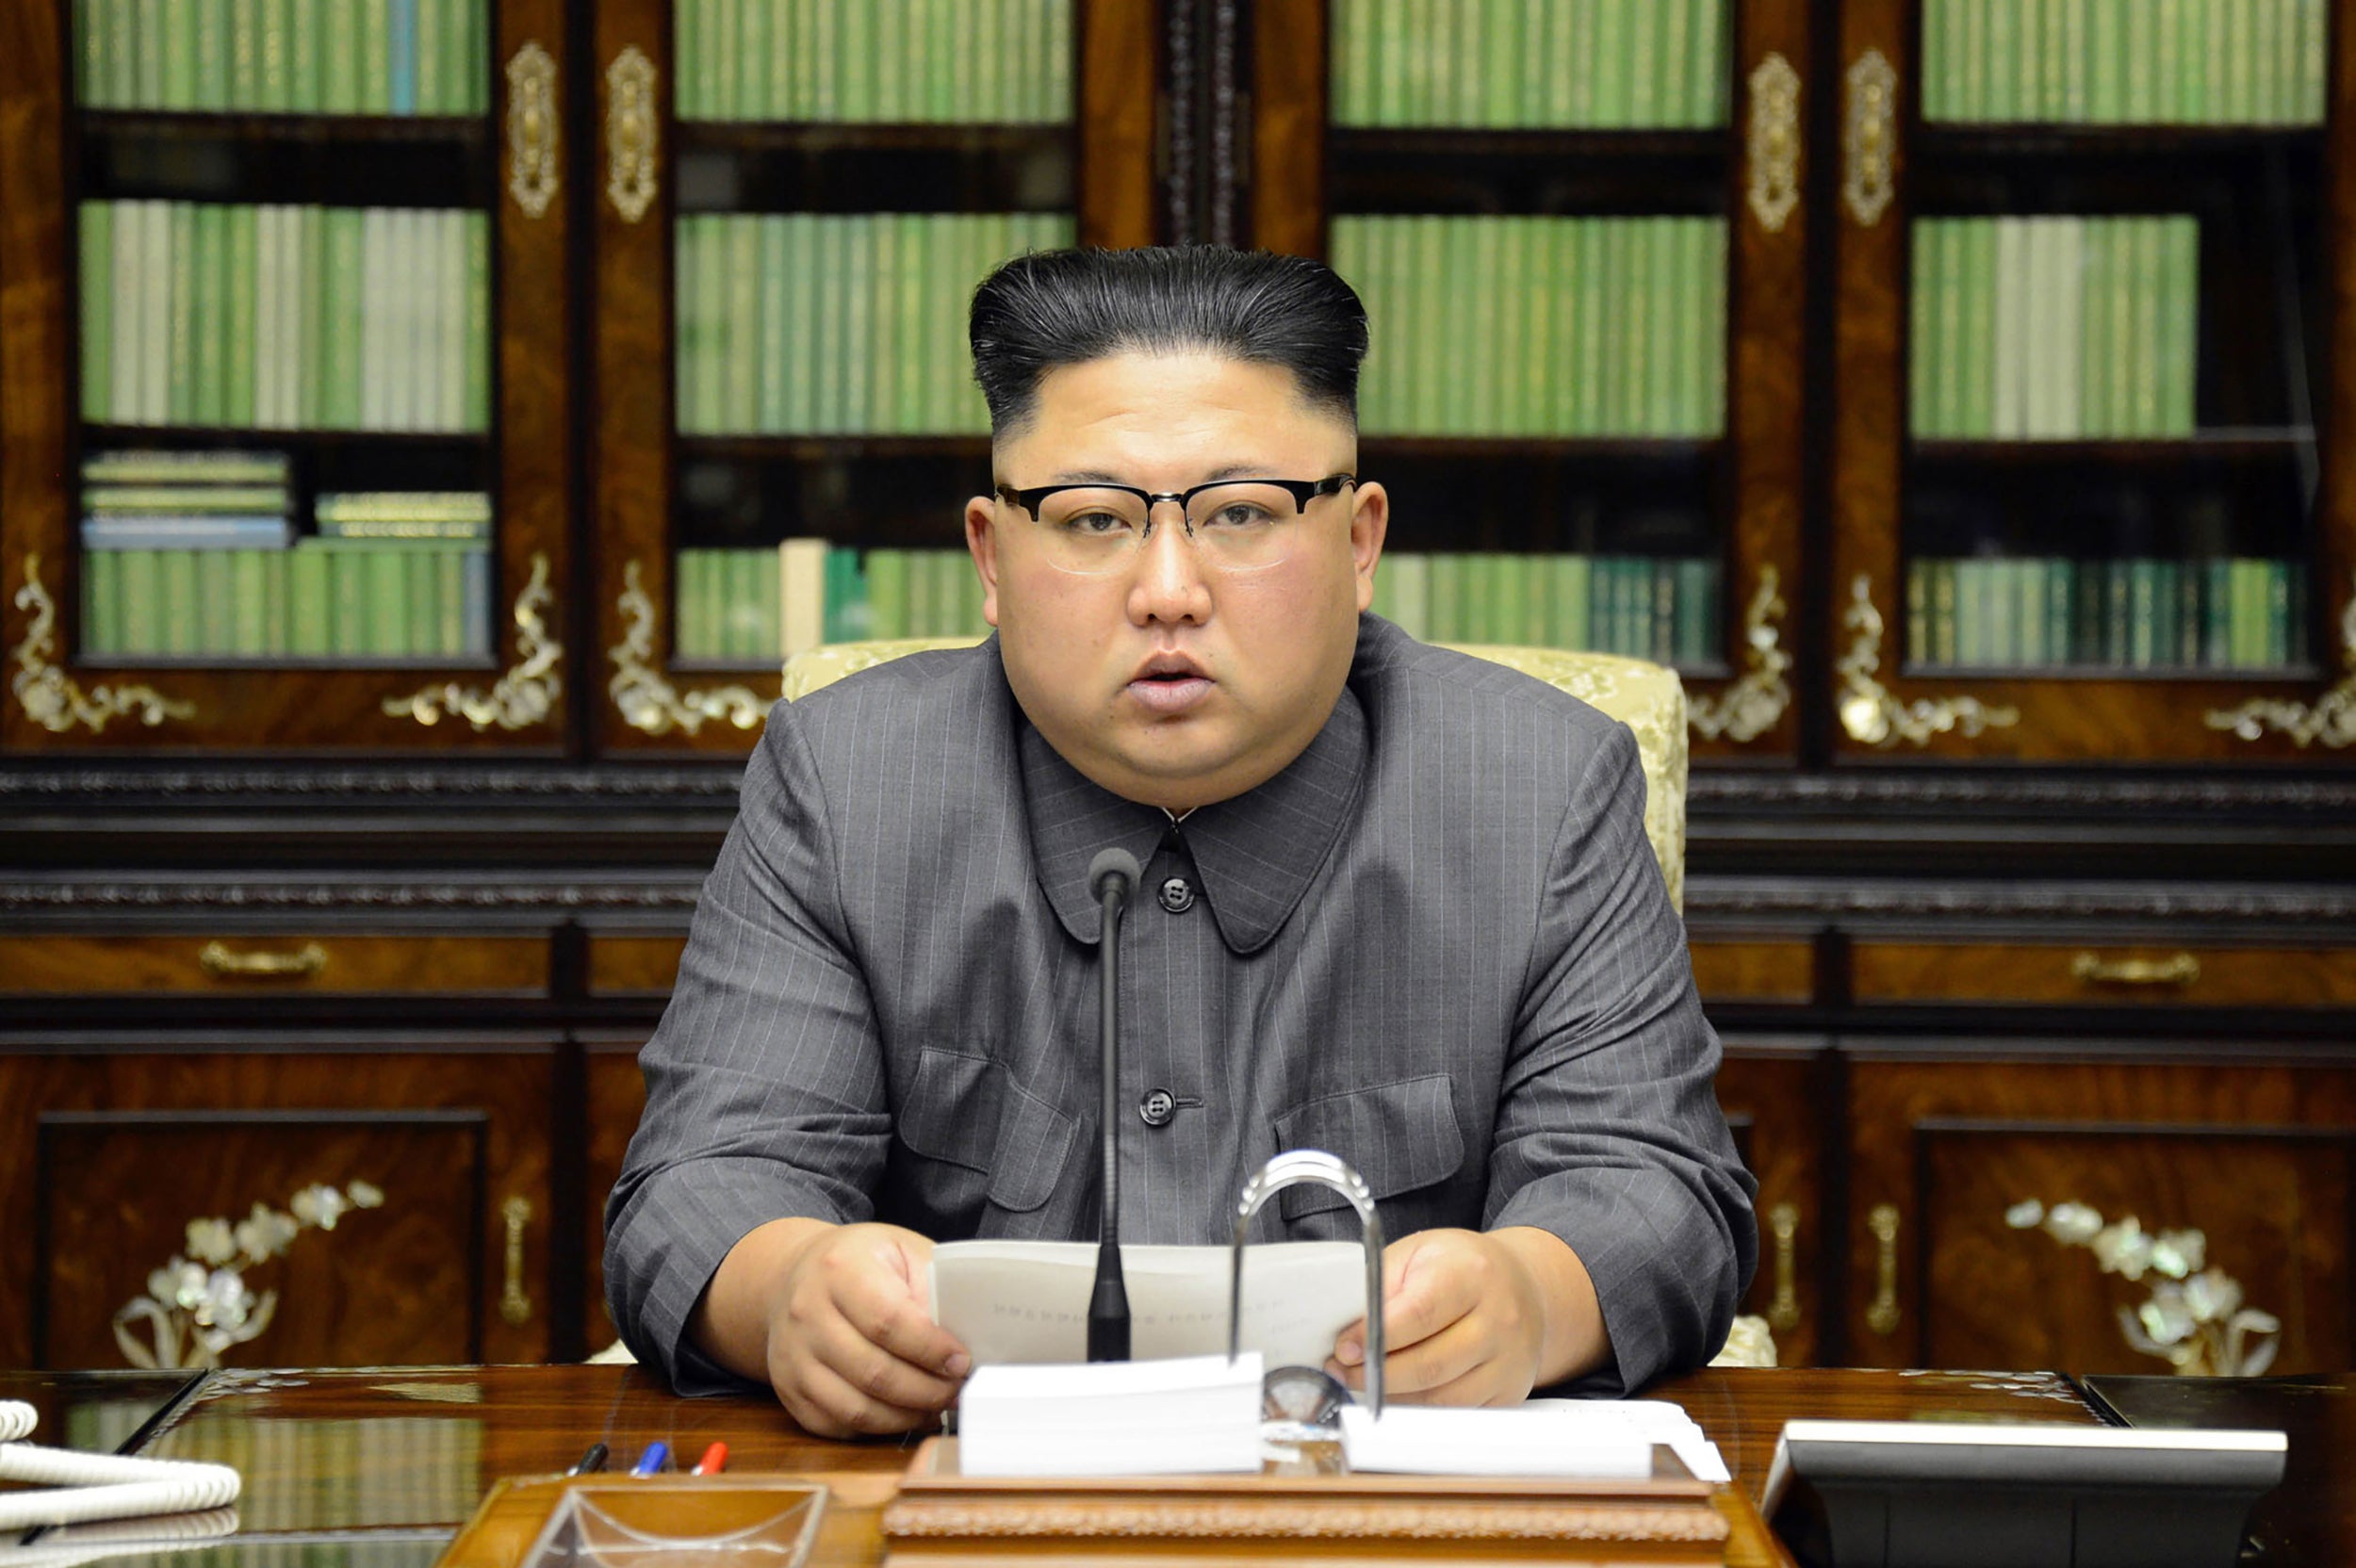 Kim Jong Un: North Korea’s Nuclear Forces Are A Reality, Not A Threat